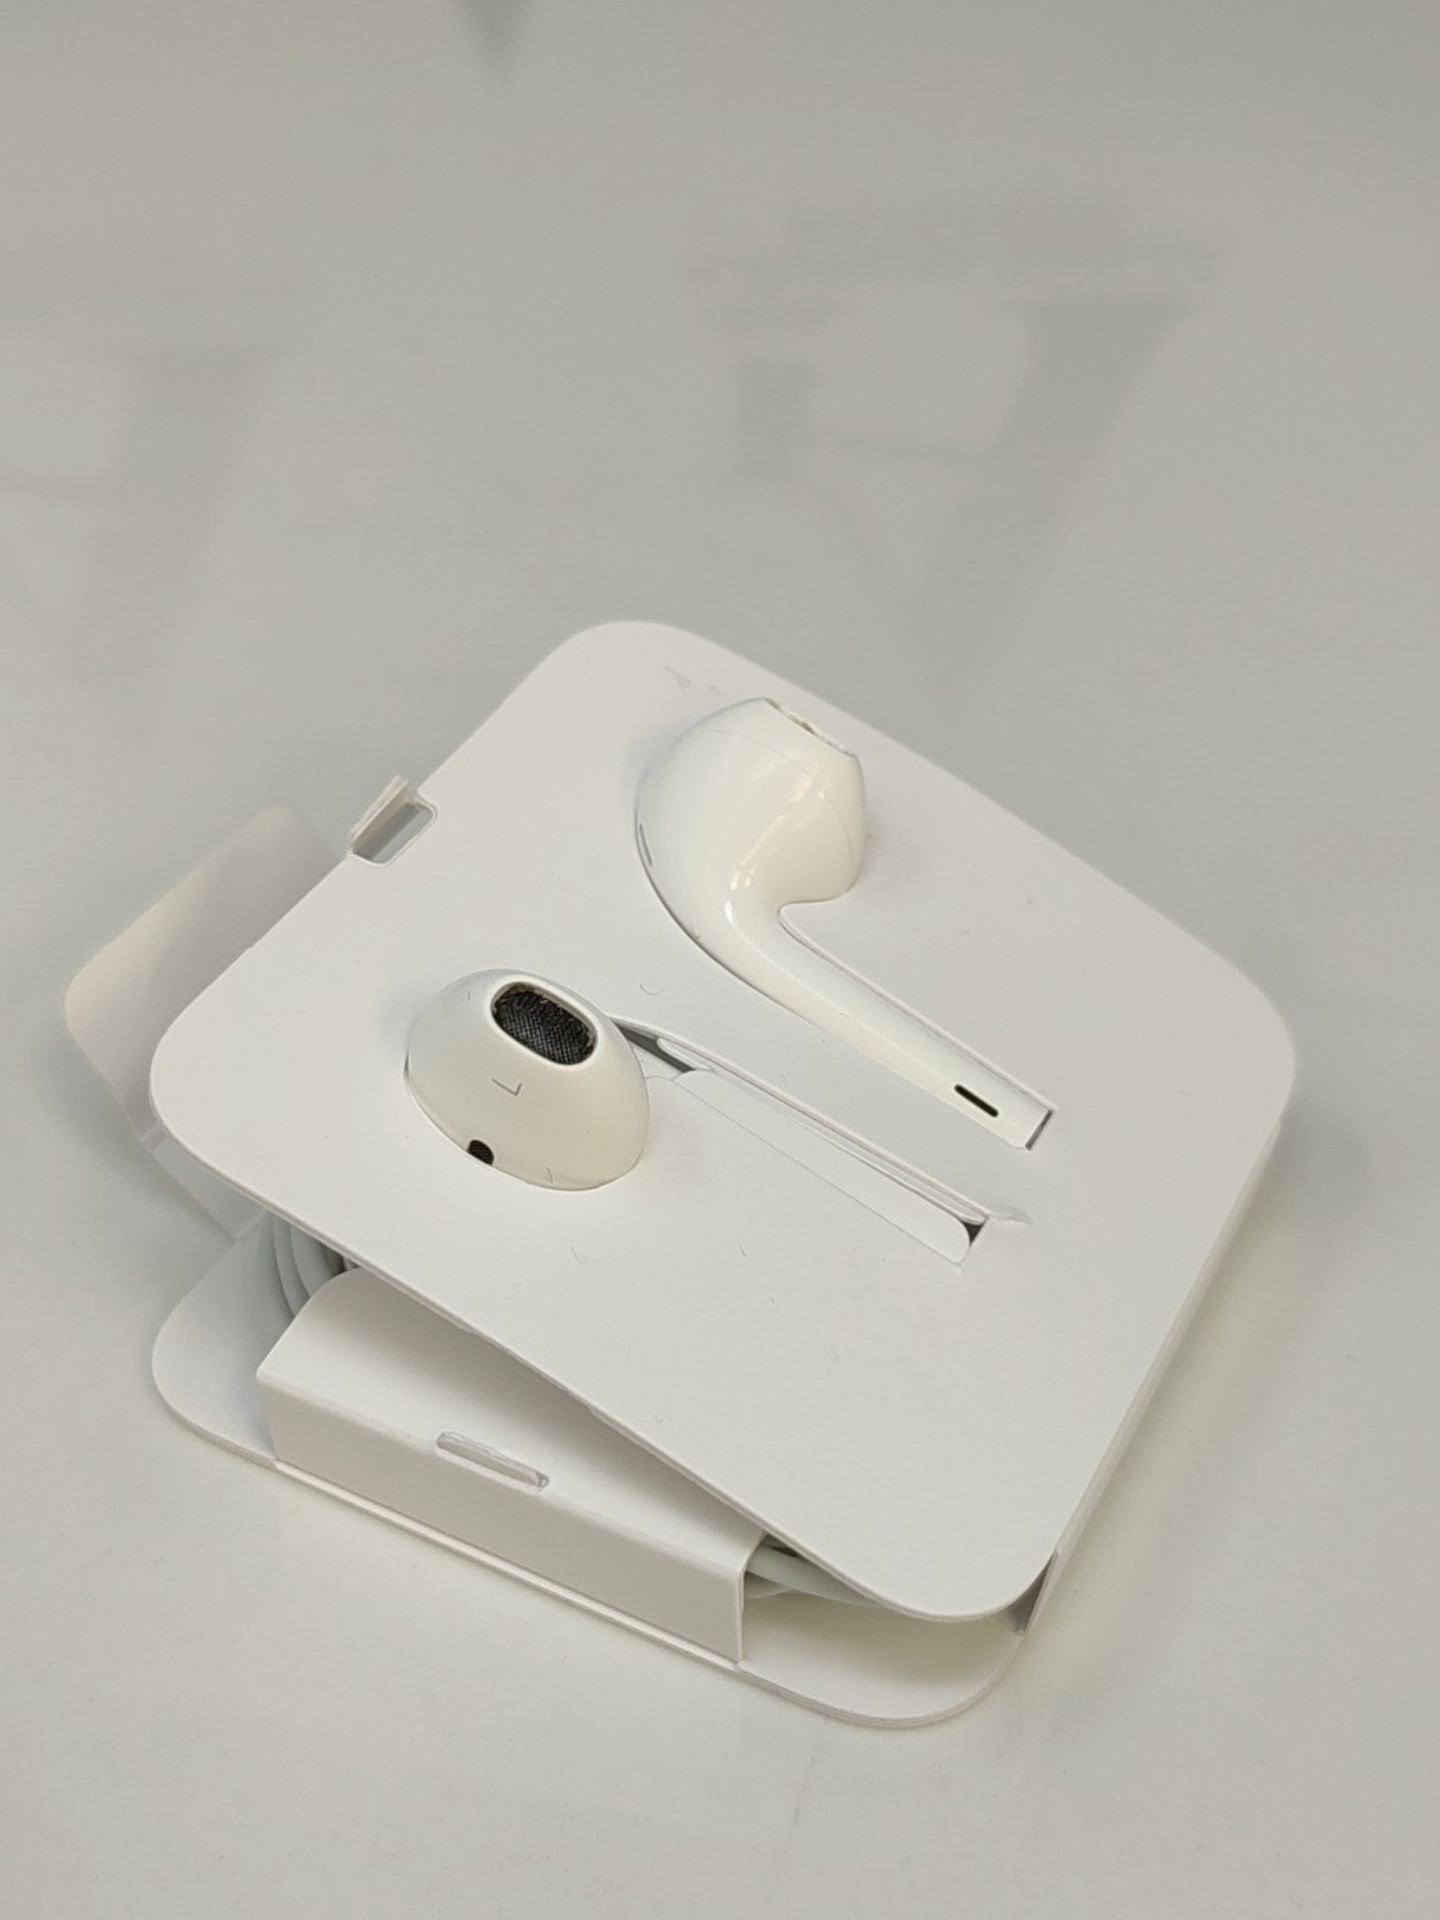 Apple EarPods with Lightning connector - Image 6 of 6